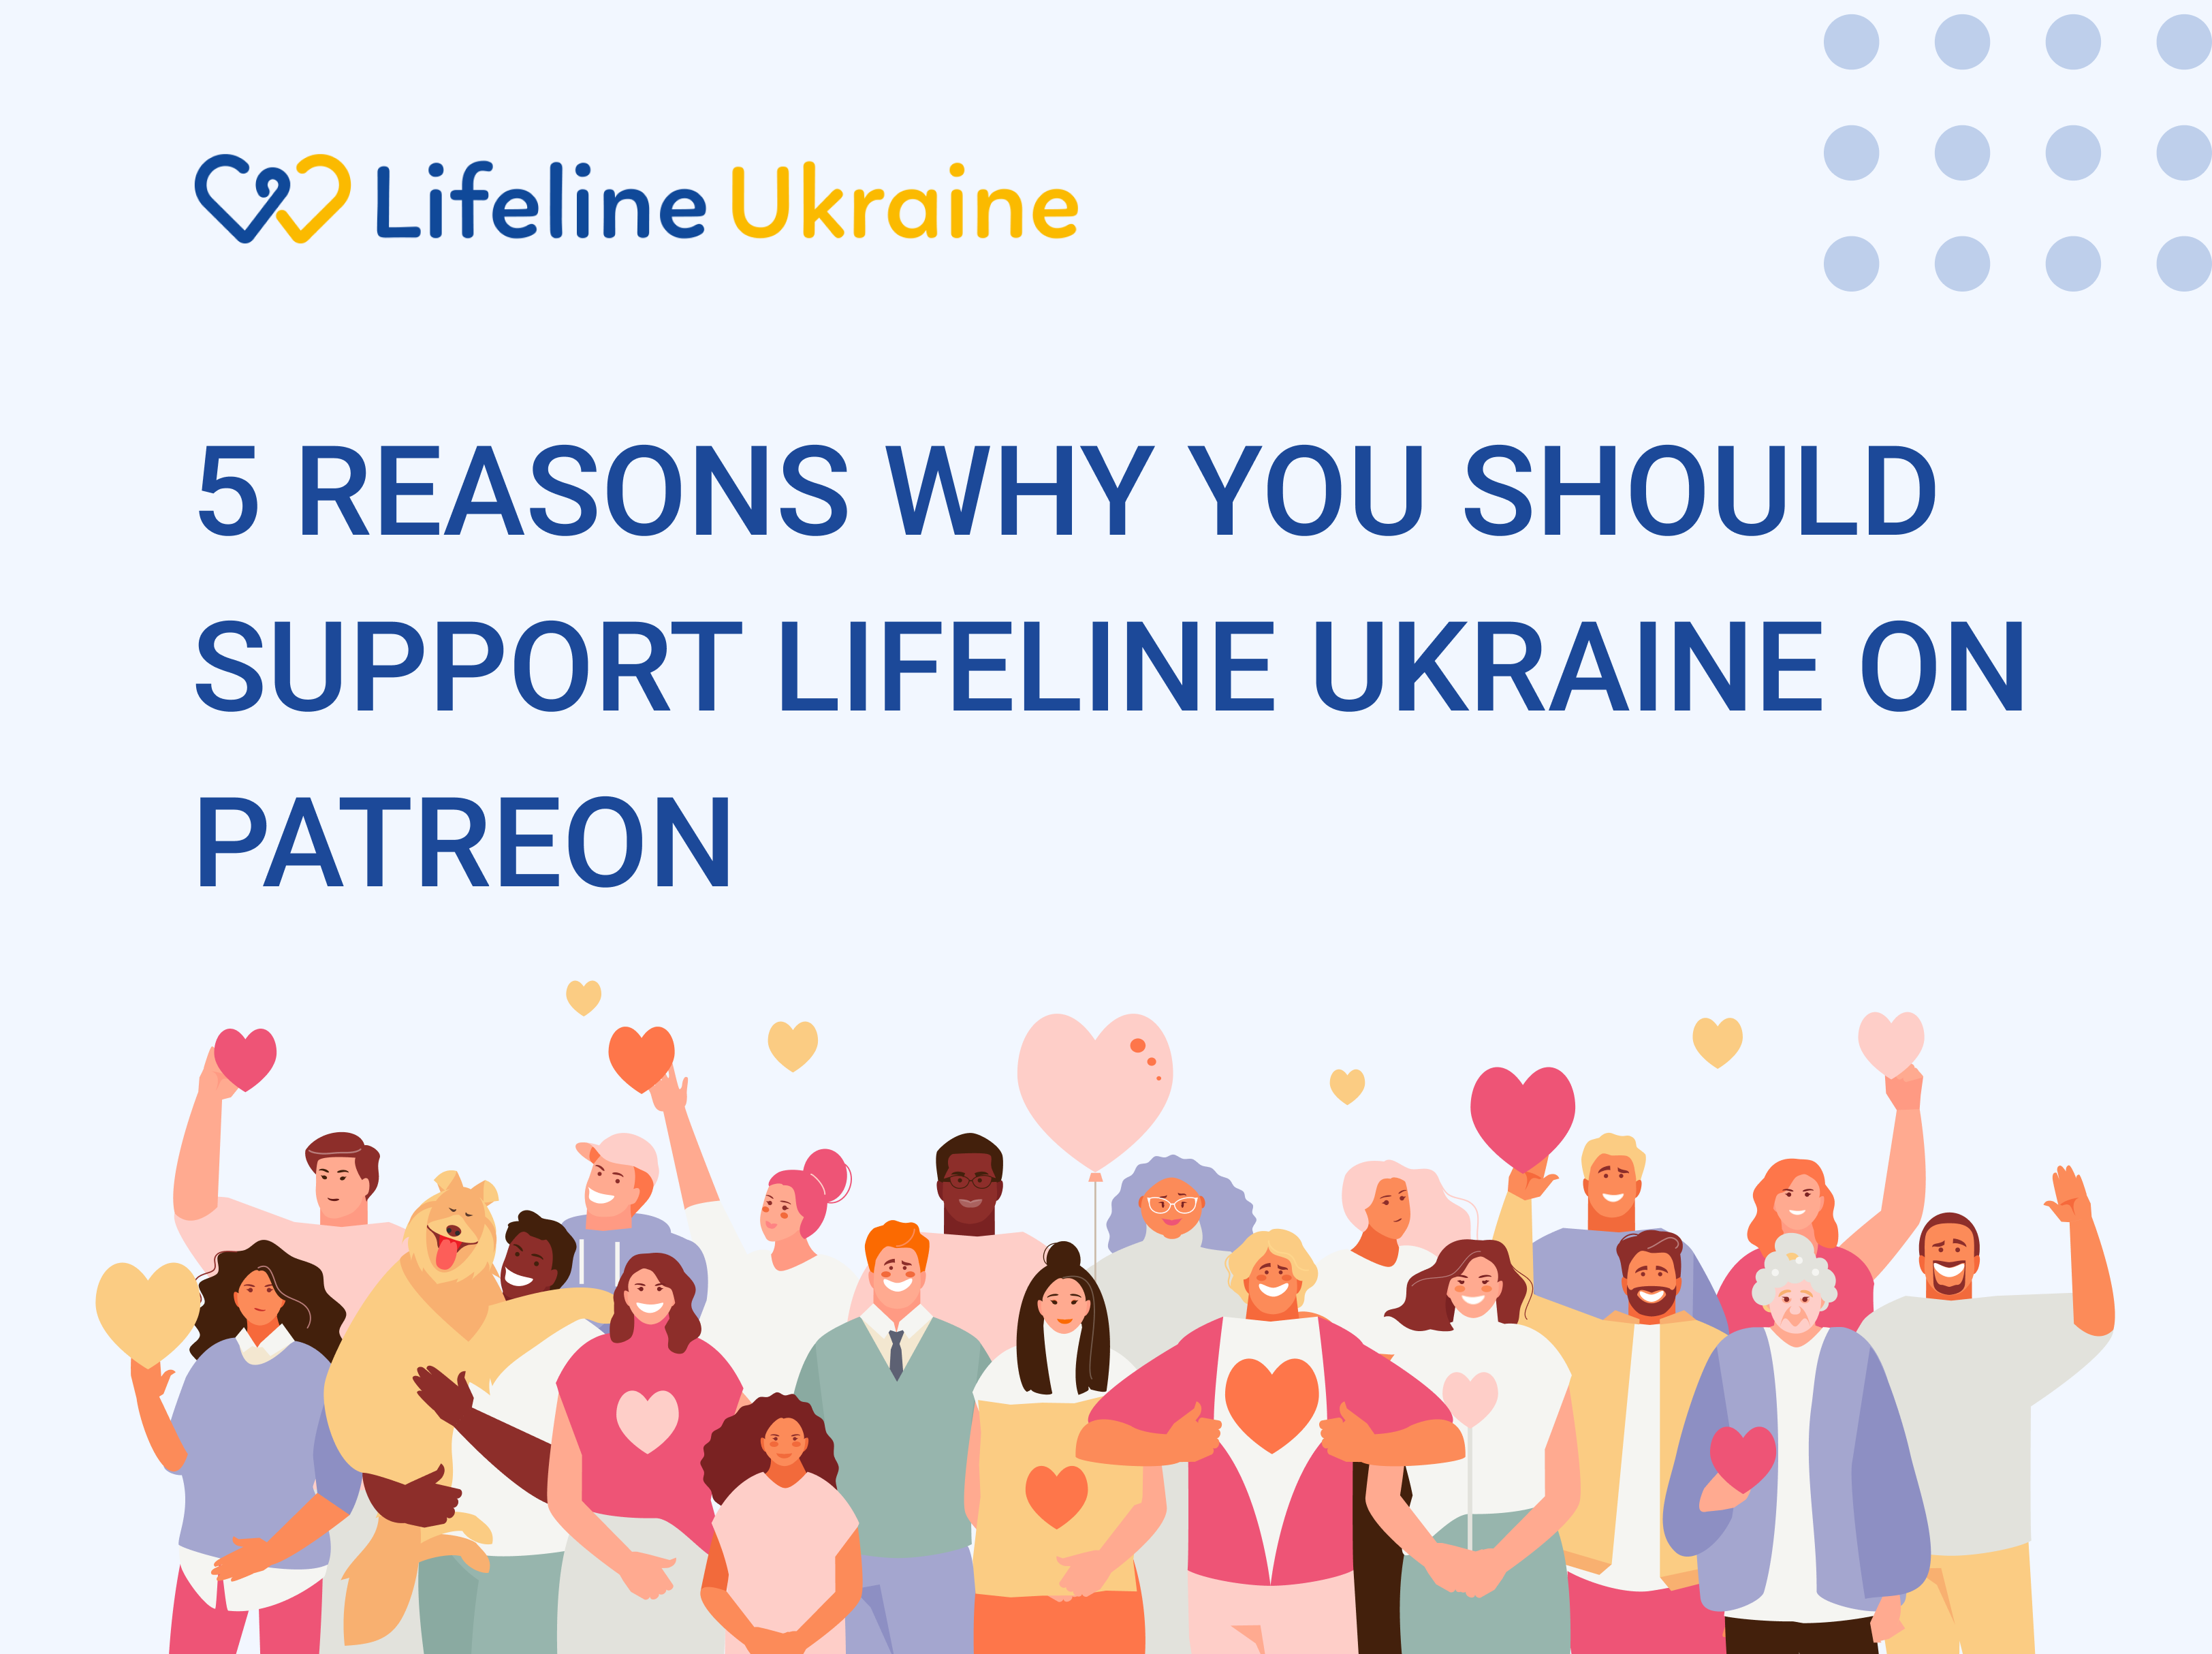 People who are supporting LifelineUkraine with many hearts